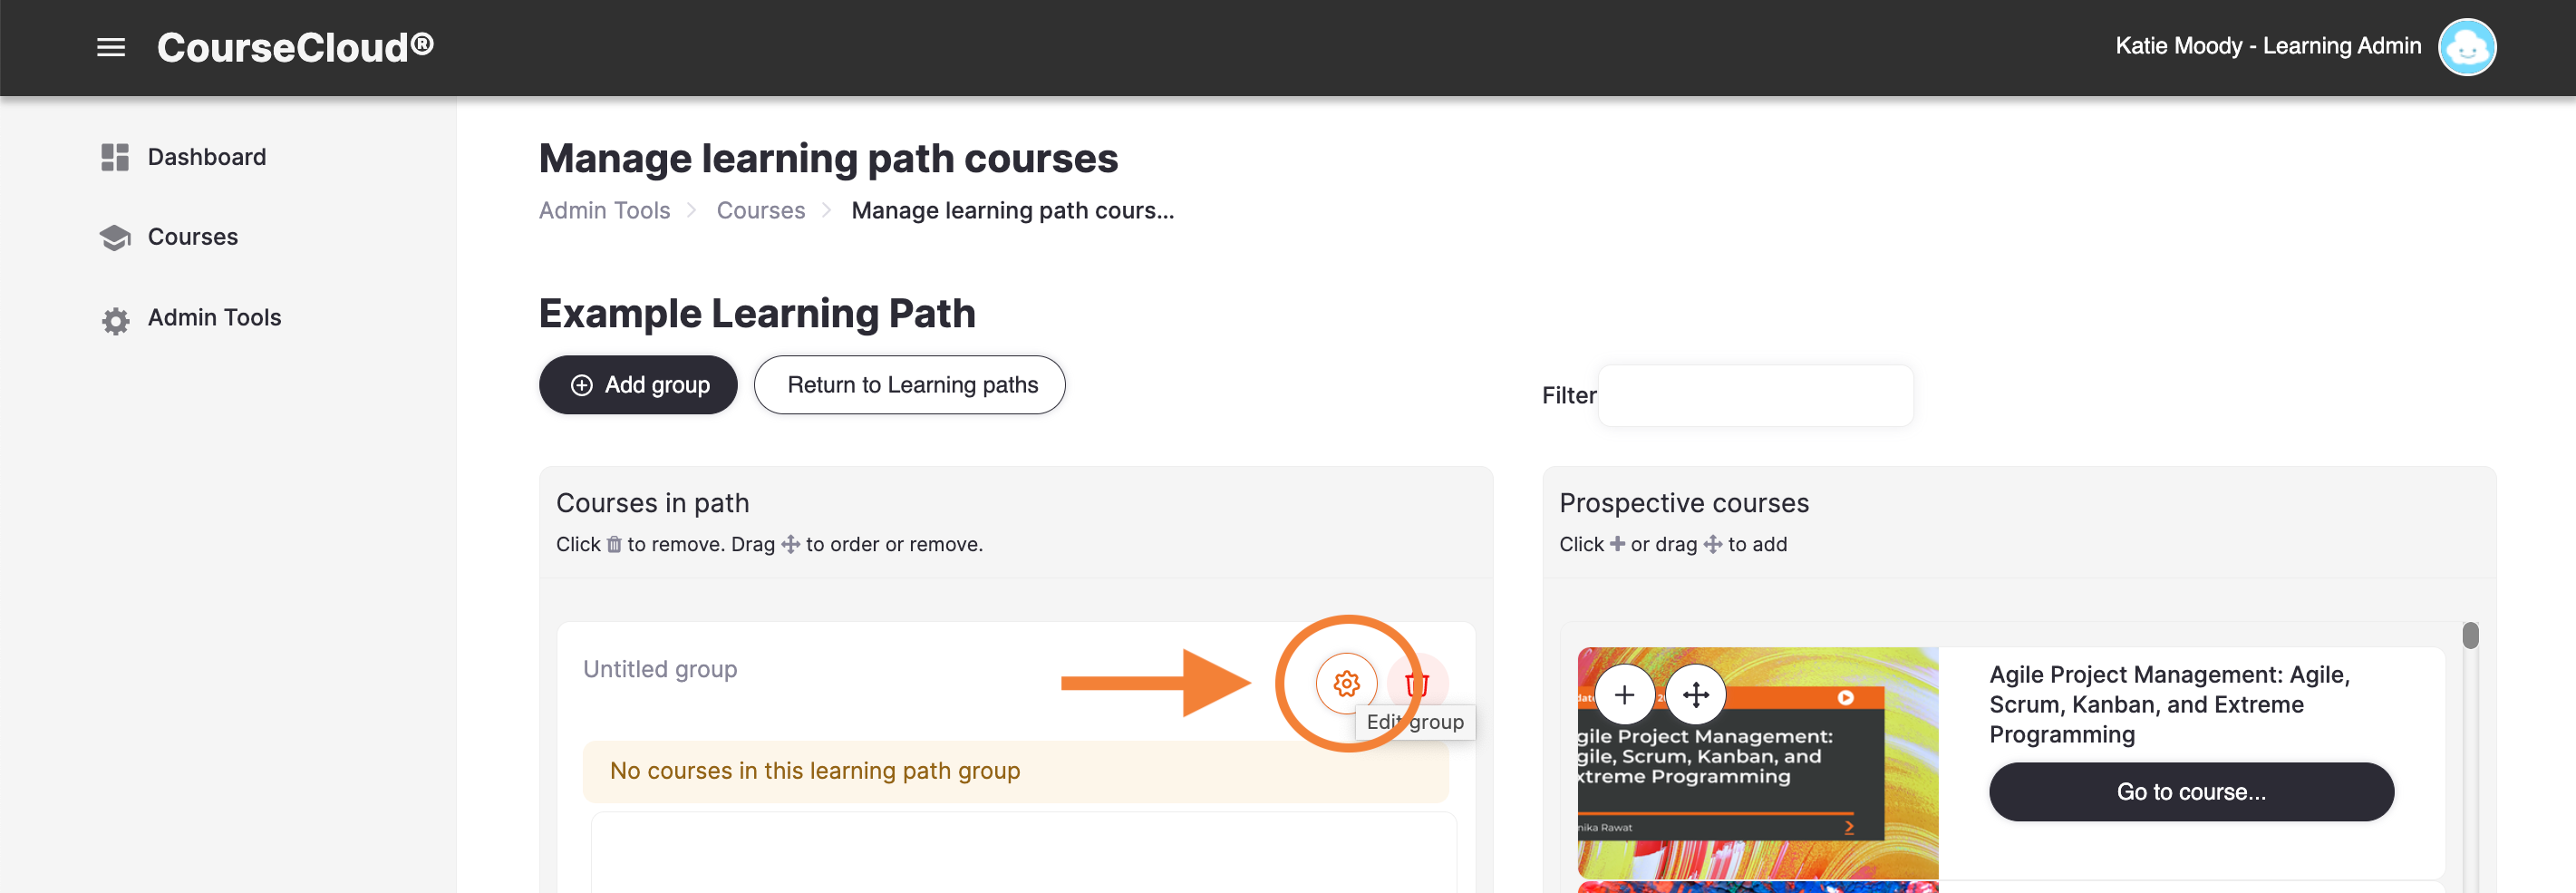 11_-_The_Manage_Learning_Path_Courses_page__indicating_the_example_group_s_gear_icon.png